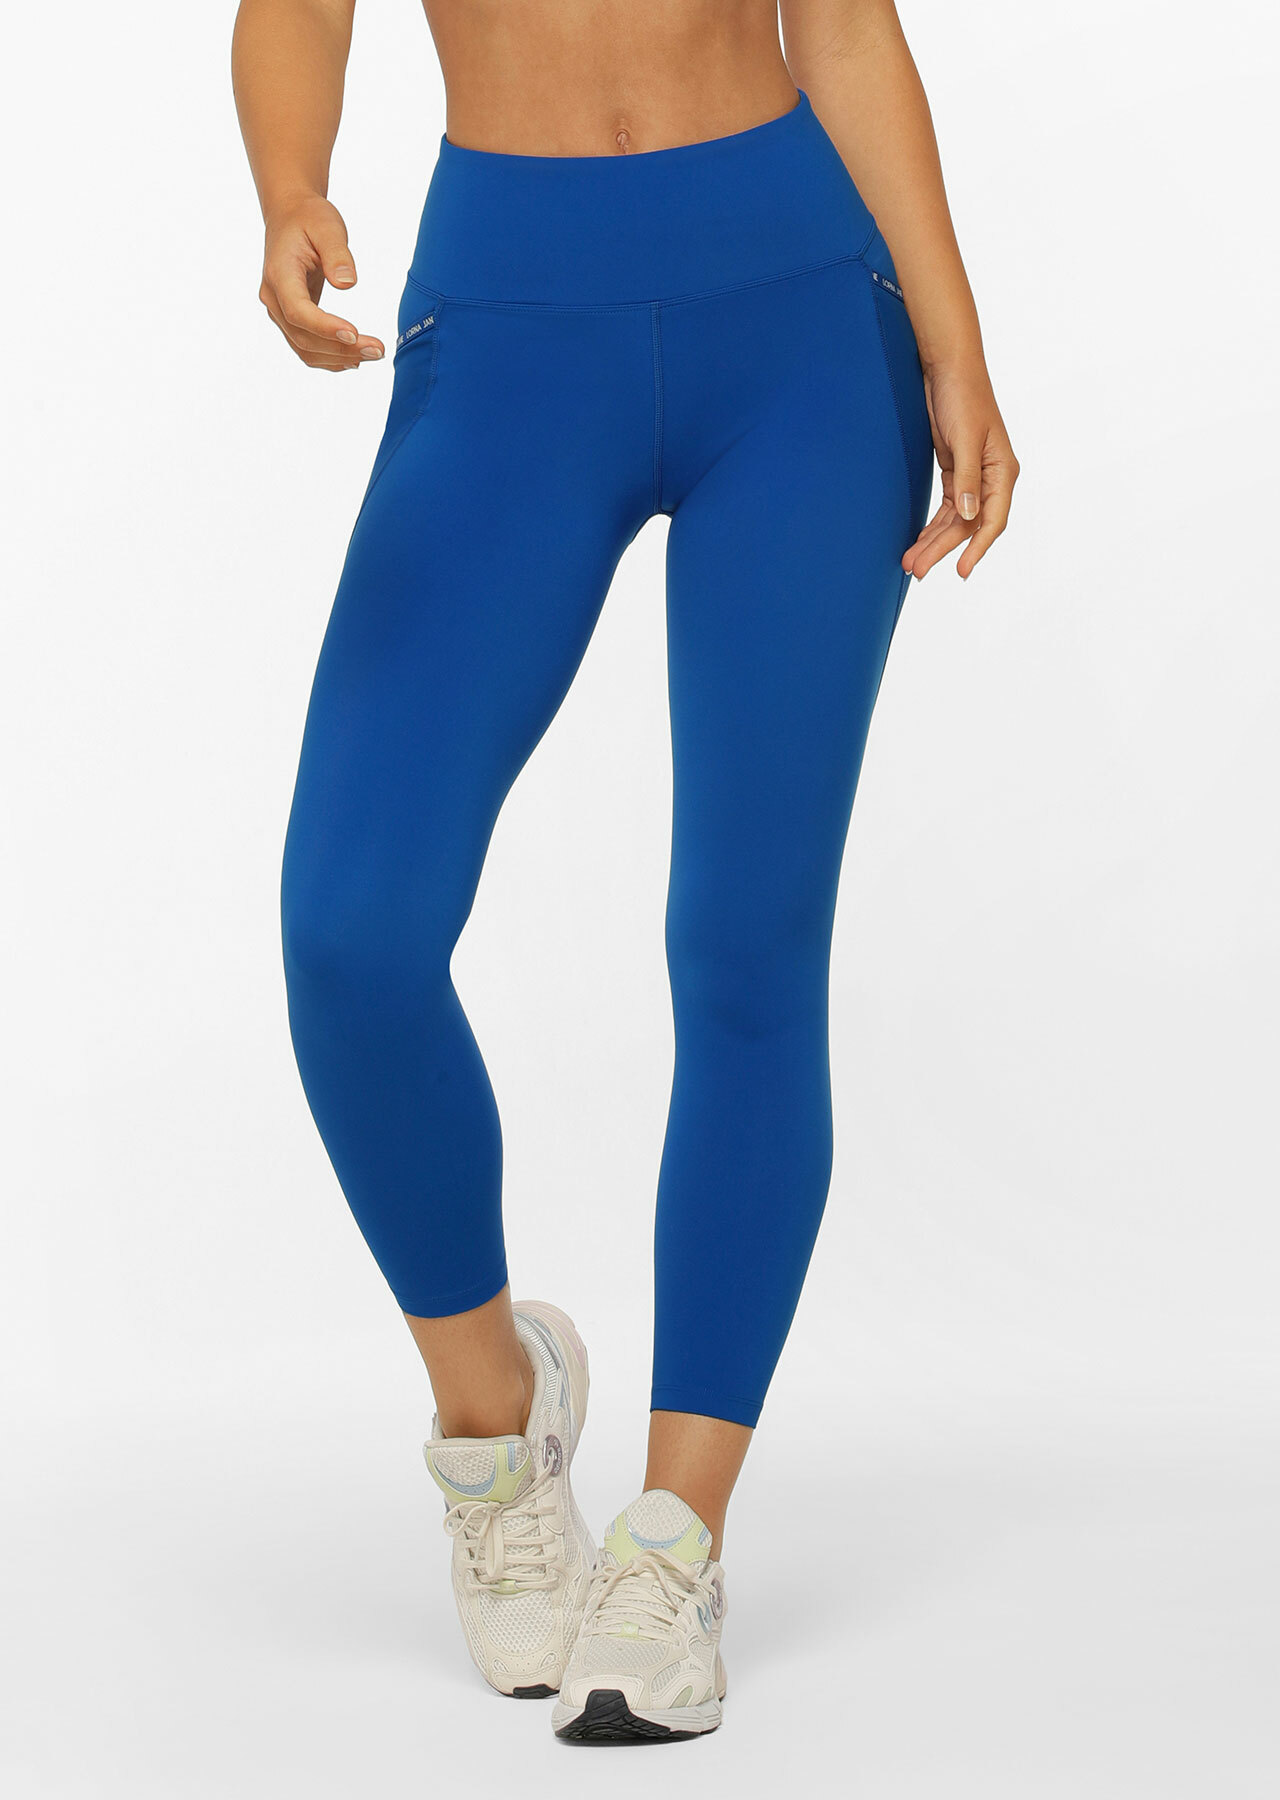 Get Physical No Chafe Ankle Biter Leggings, Blue